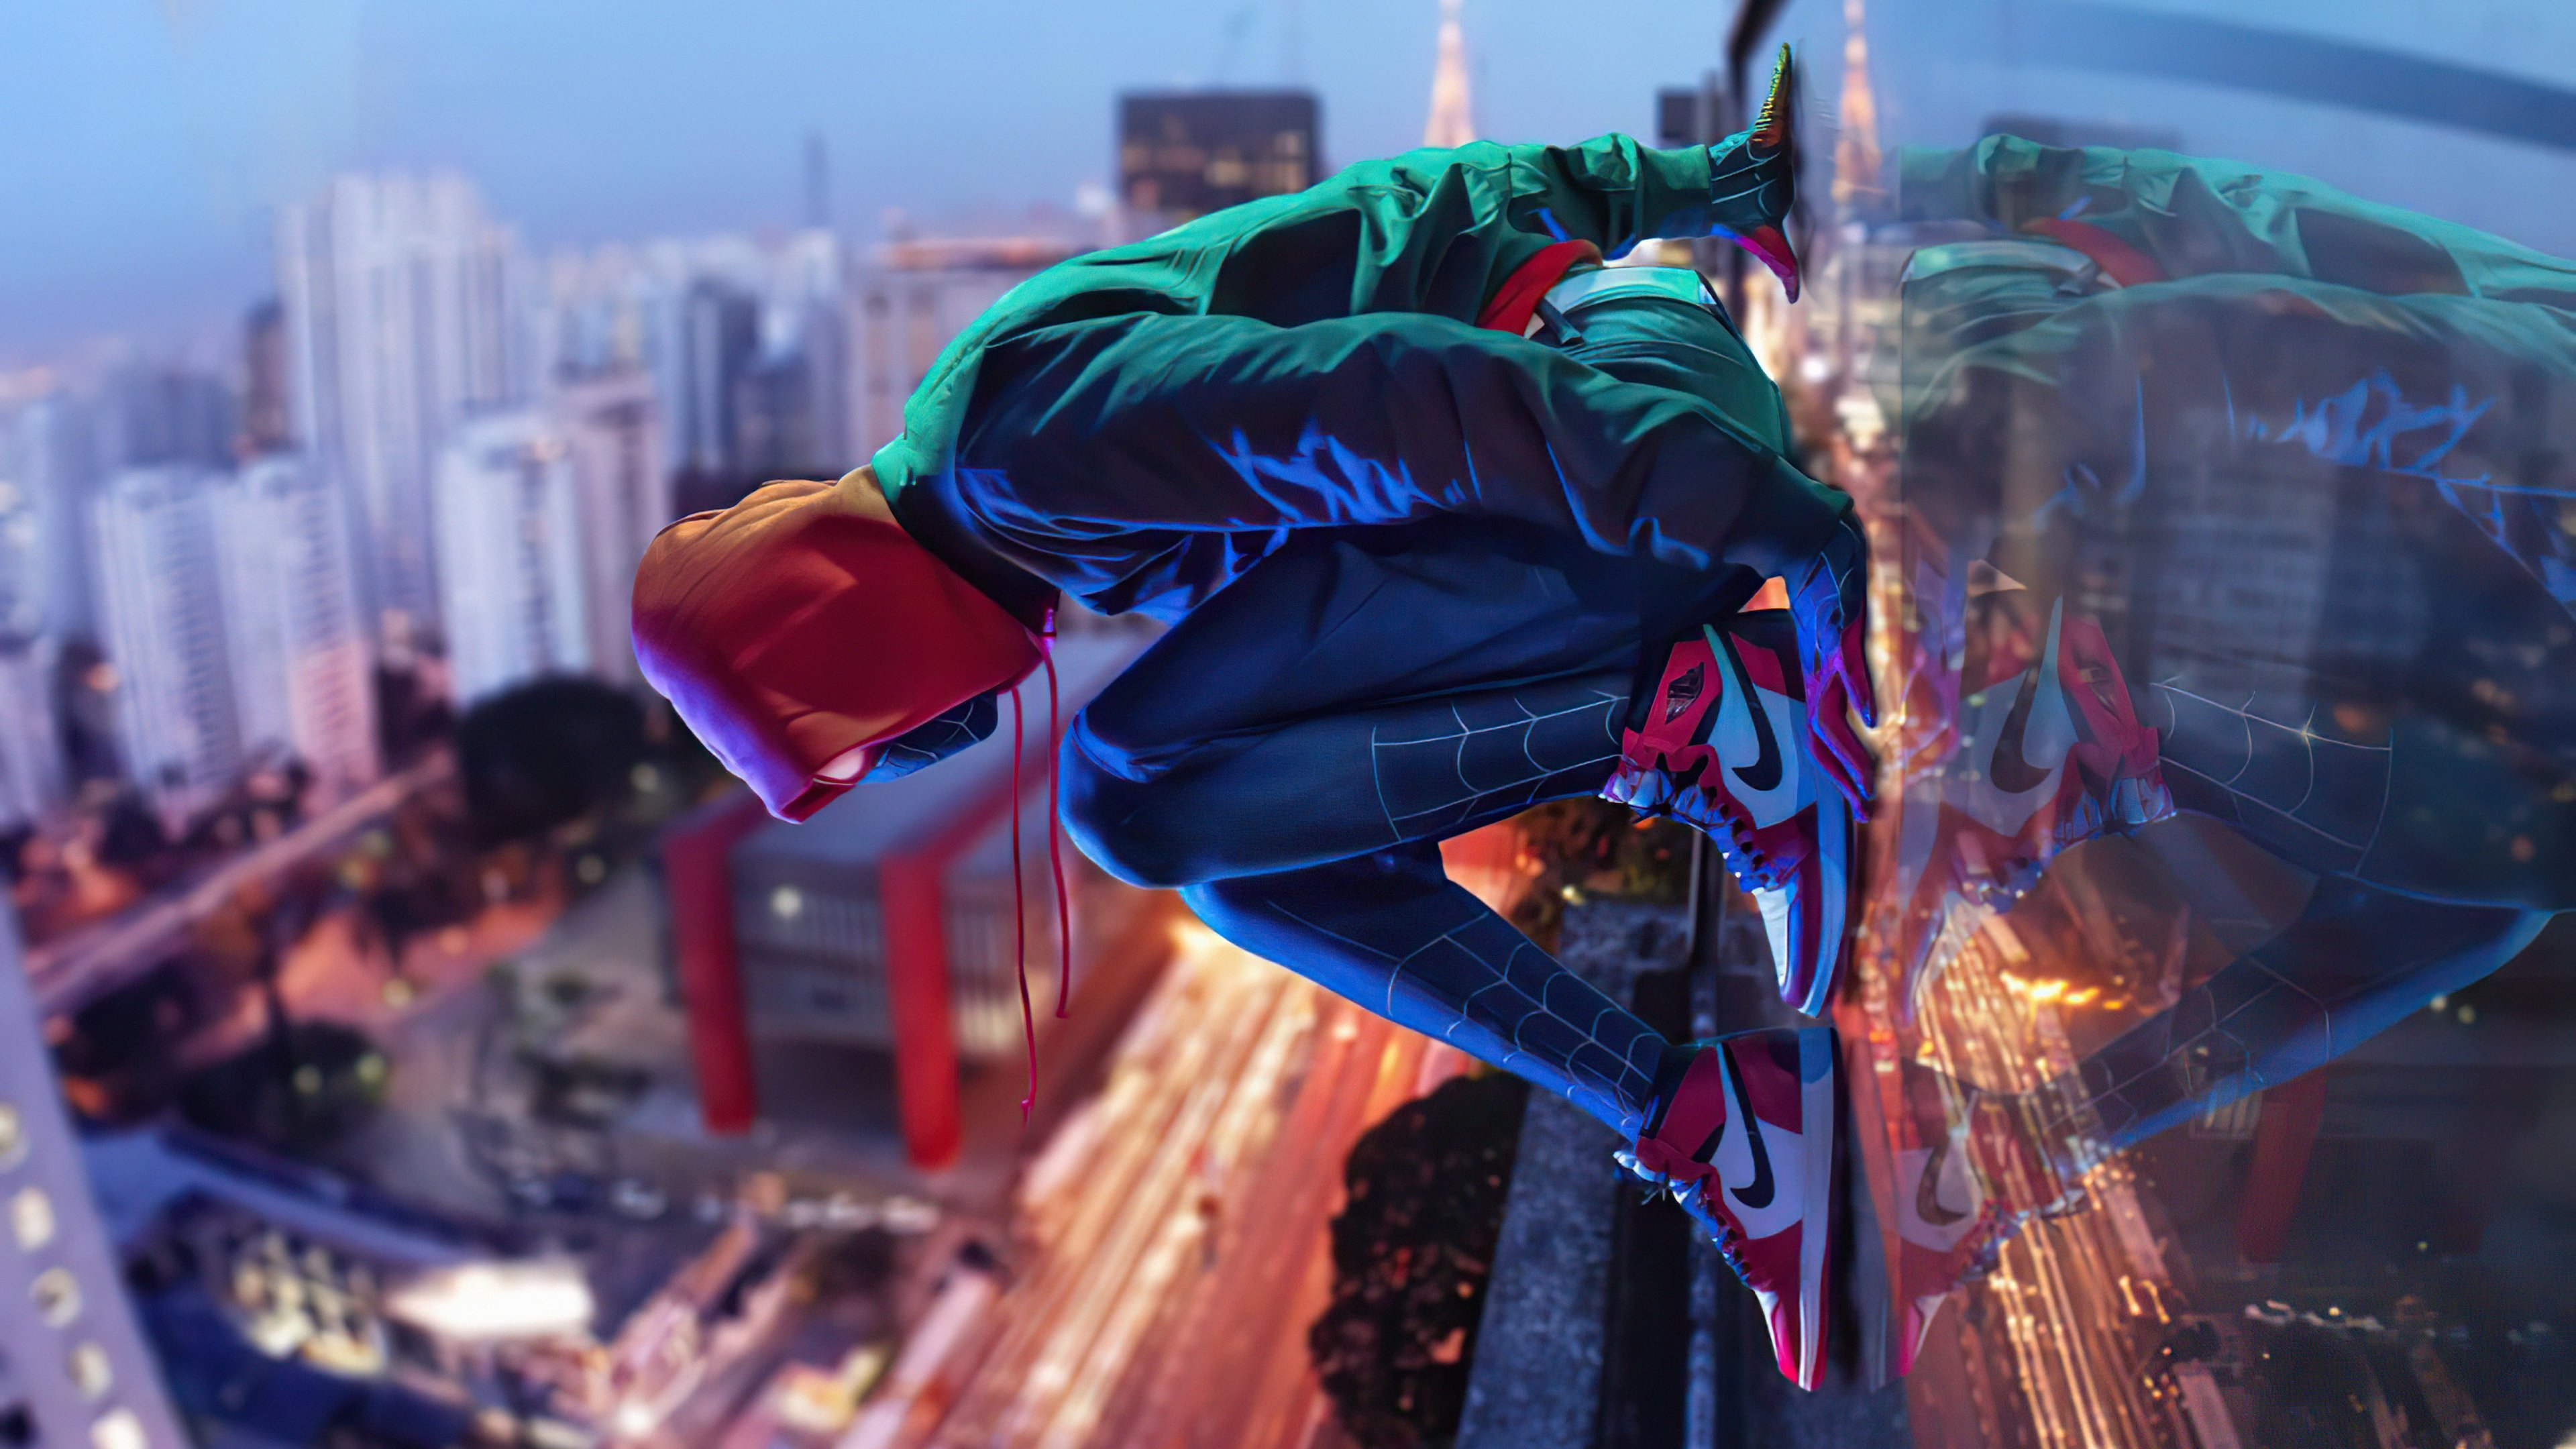 Miles Morales on the side of building Wallpaper 5k Ultra HD ID:7382